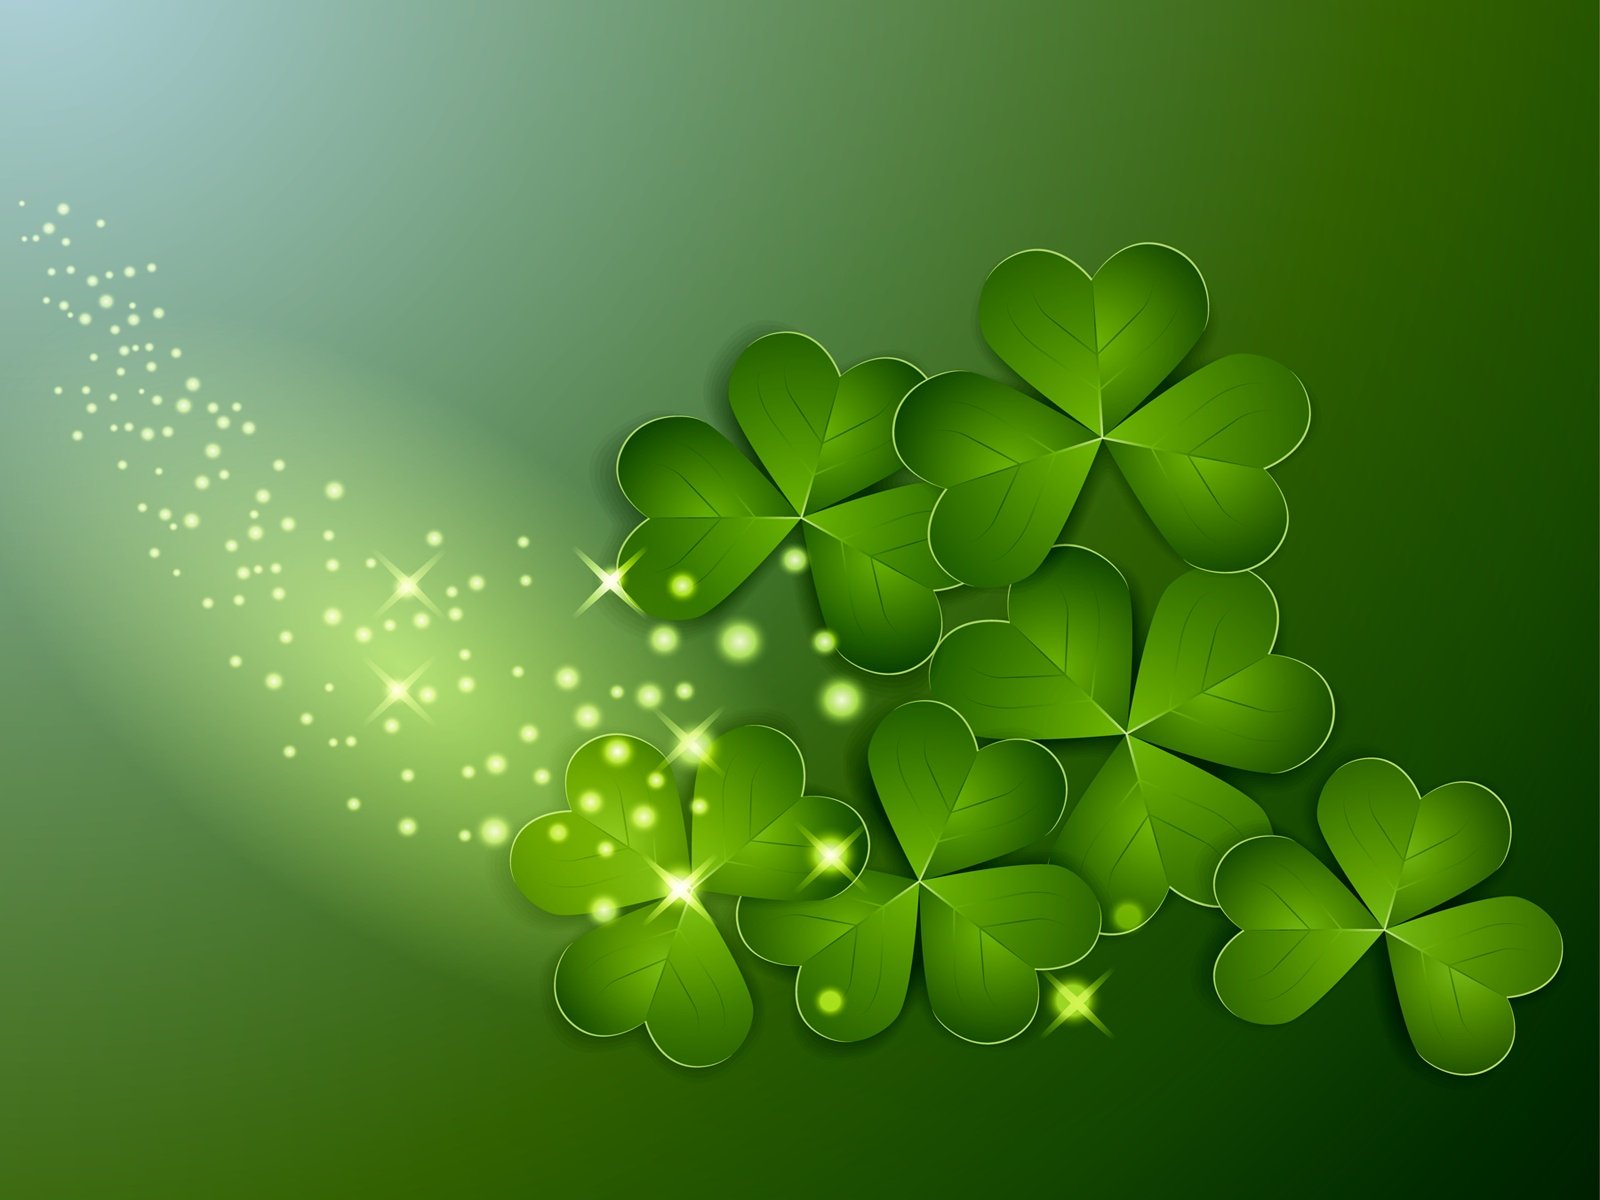 St Patricks Day Wallpaper   Miscellaneous Photos and Wallpapers 1600x1200